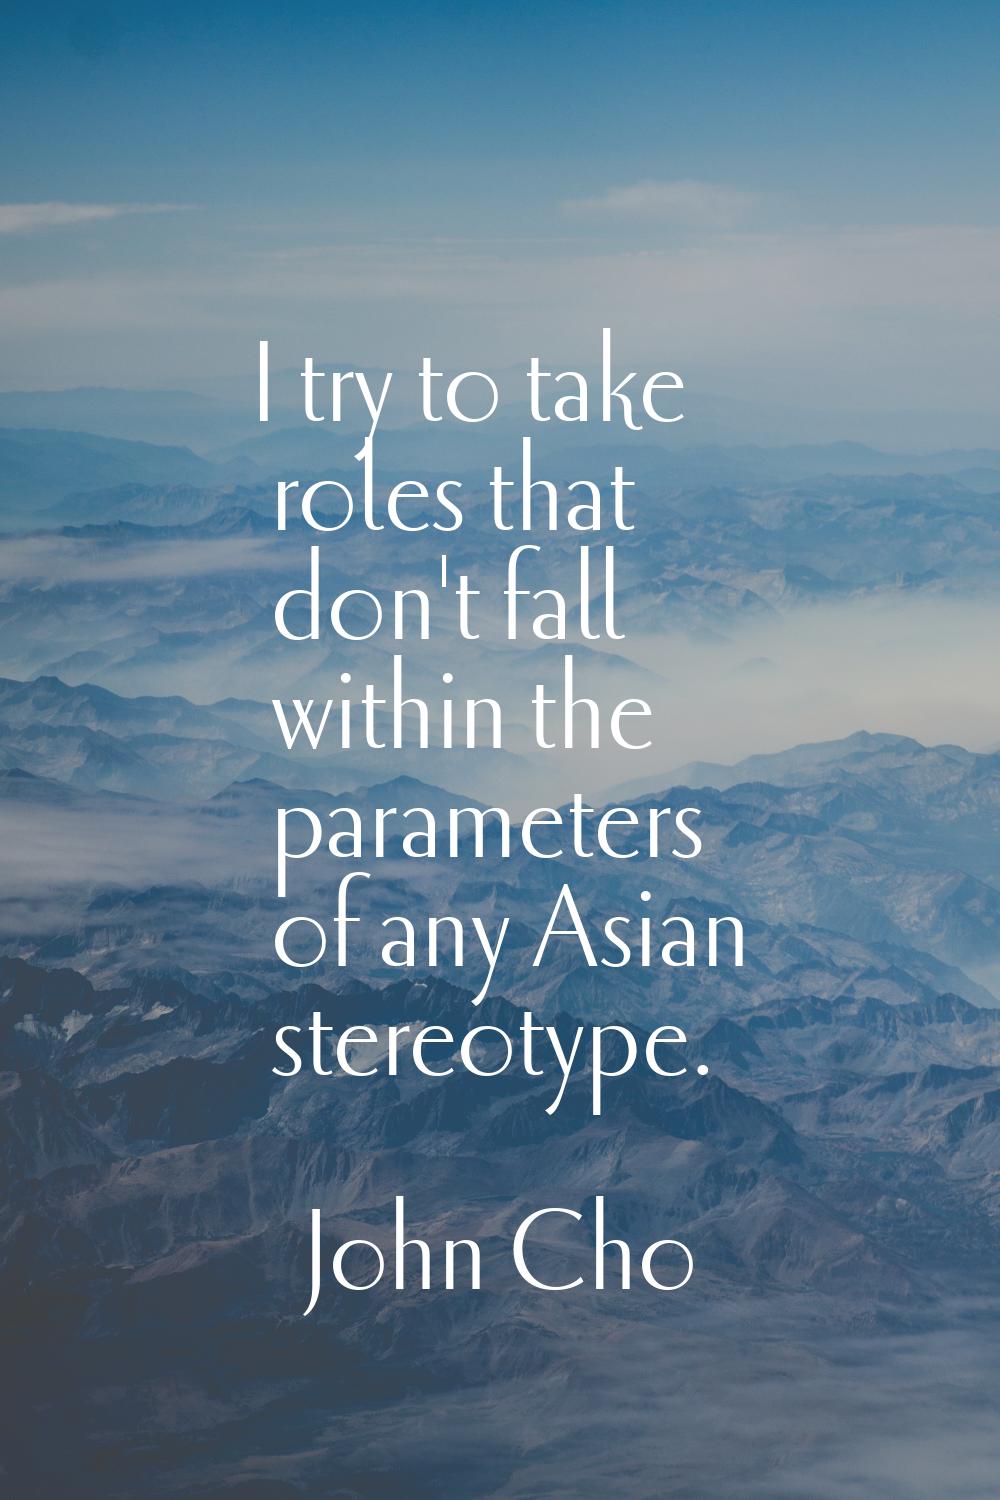 I try to take roles that don't fall within the parameters of any Asian stereotype.